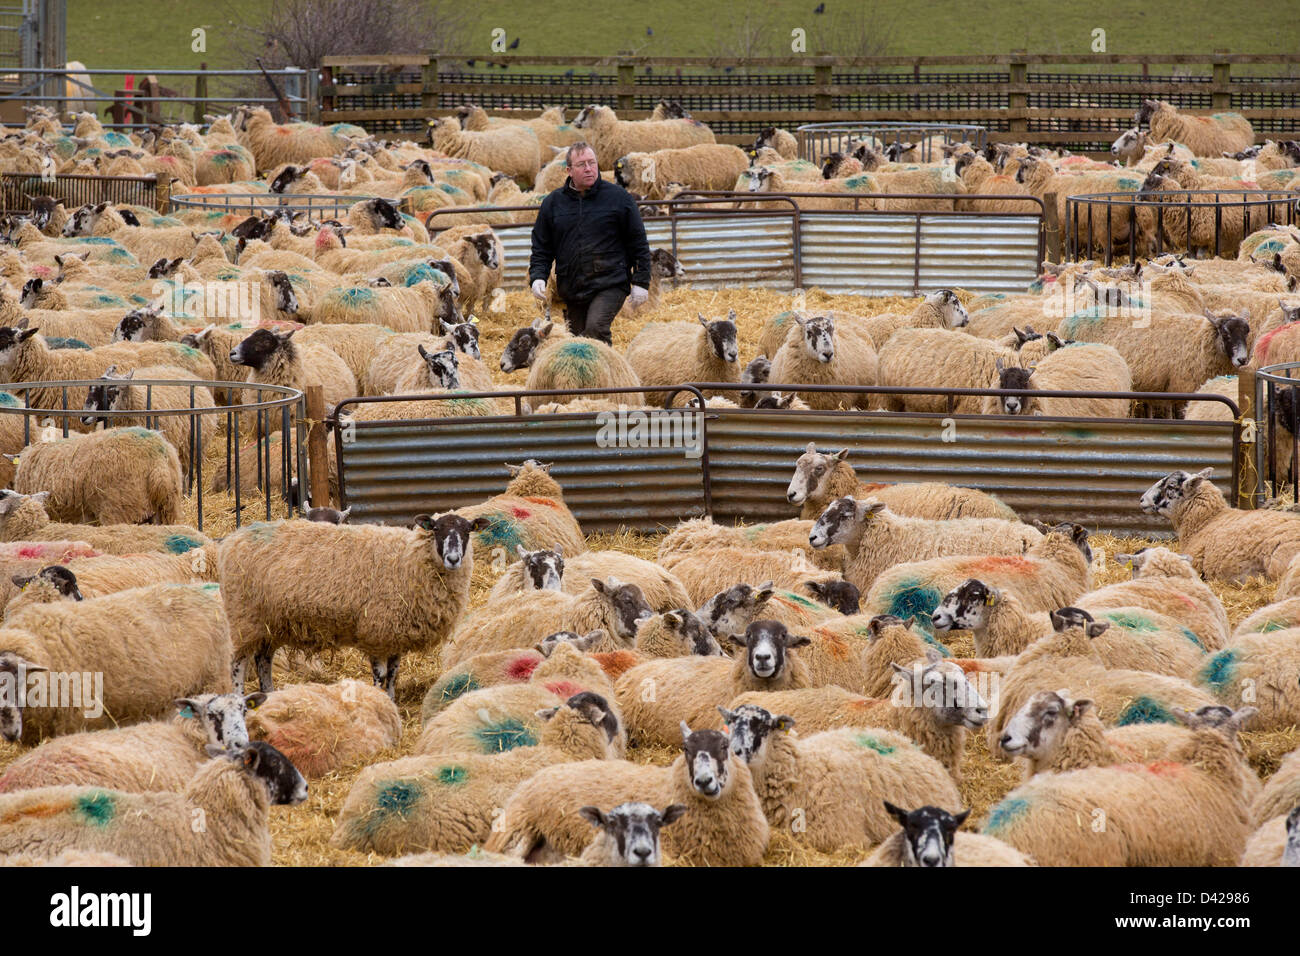 Glaston, Rutland, UK. March 2nd 2013. Spring has arrived at Coppice Farm, Glaston, as lambing the farms ewe's get's underway. Shepherd Danny Hurst checks for new born lambs. Credit: Tim Scrivener/Alamy Live News Stock Photo